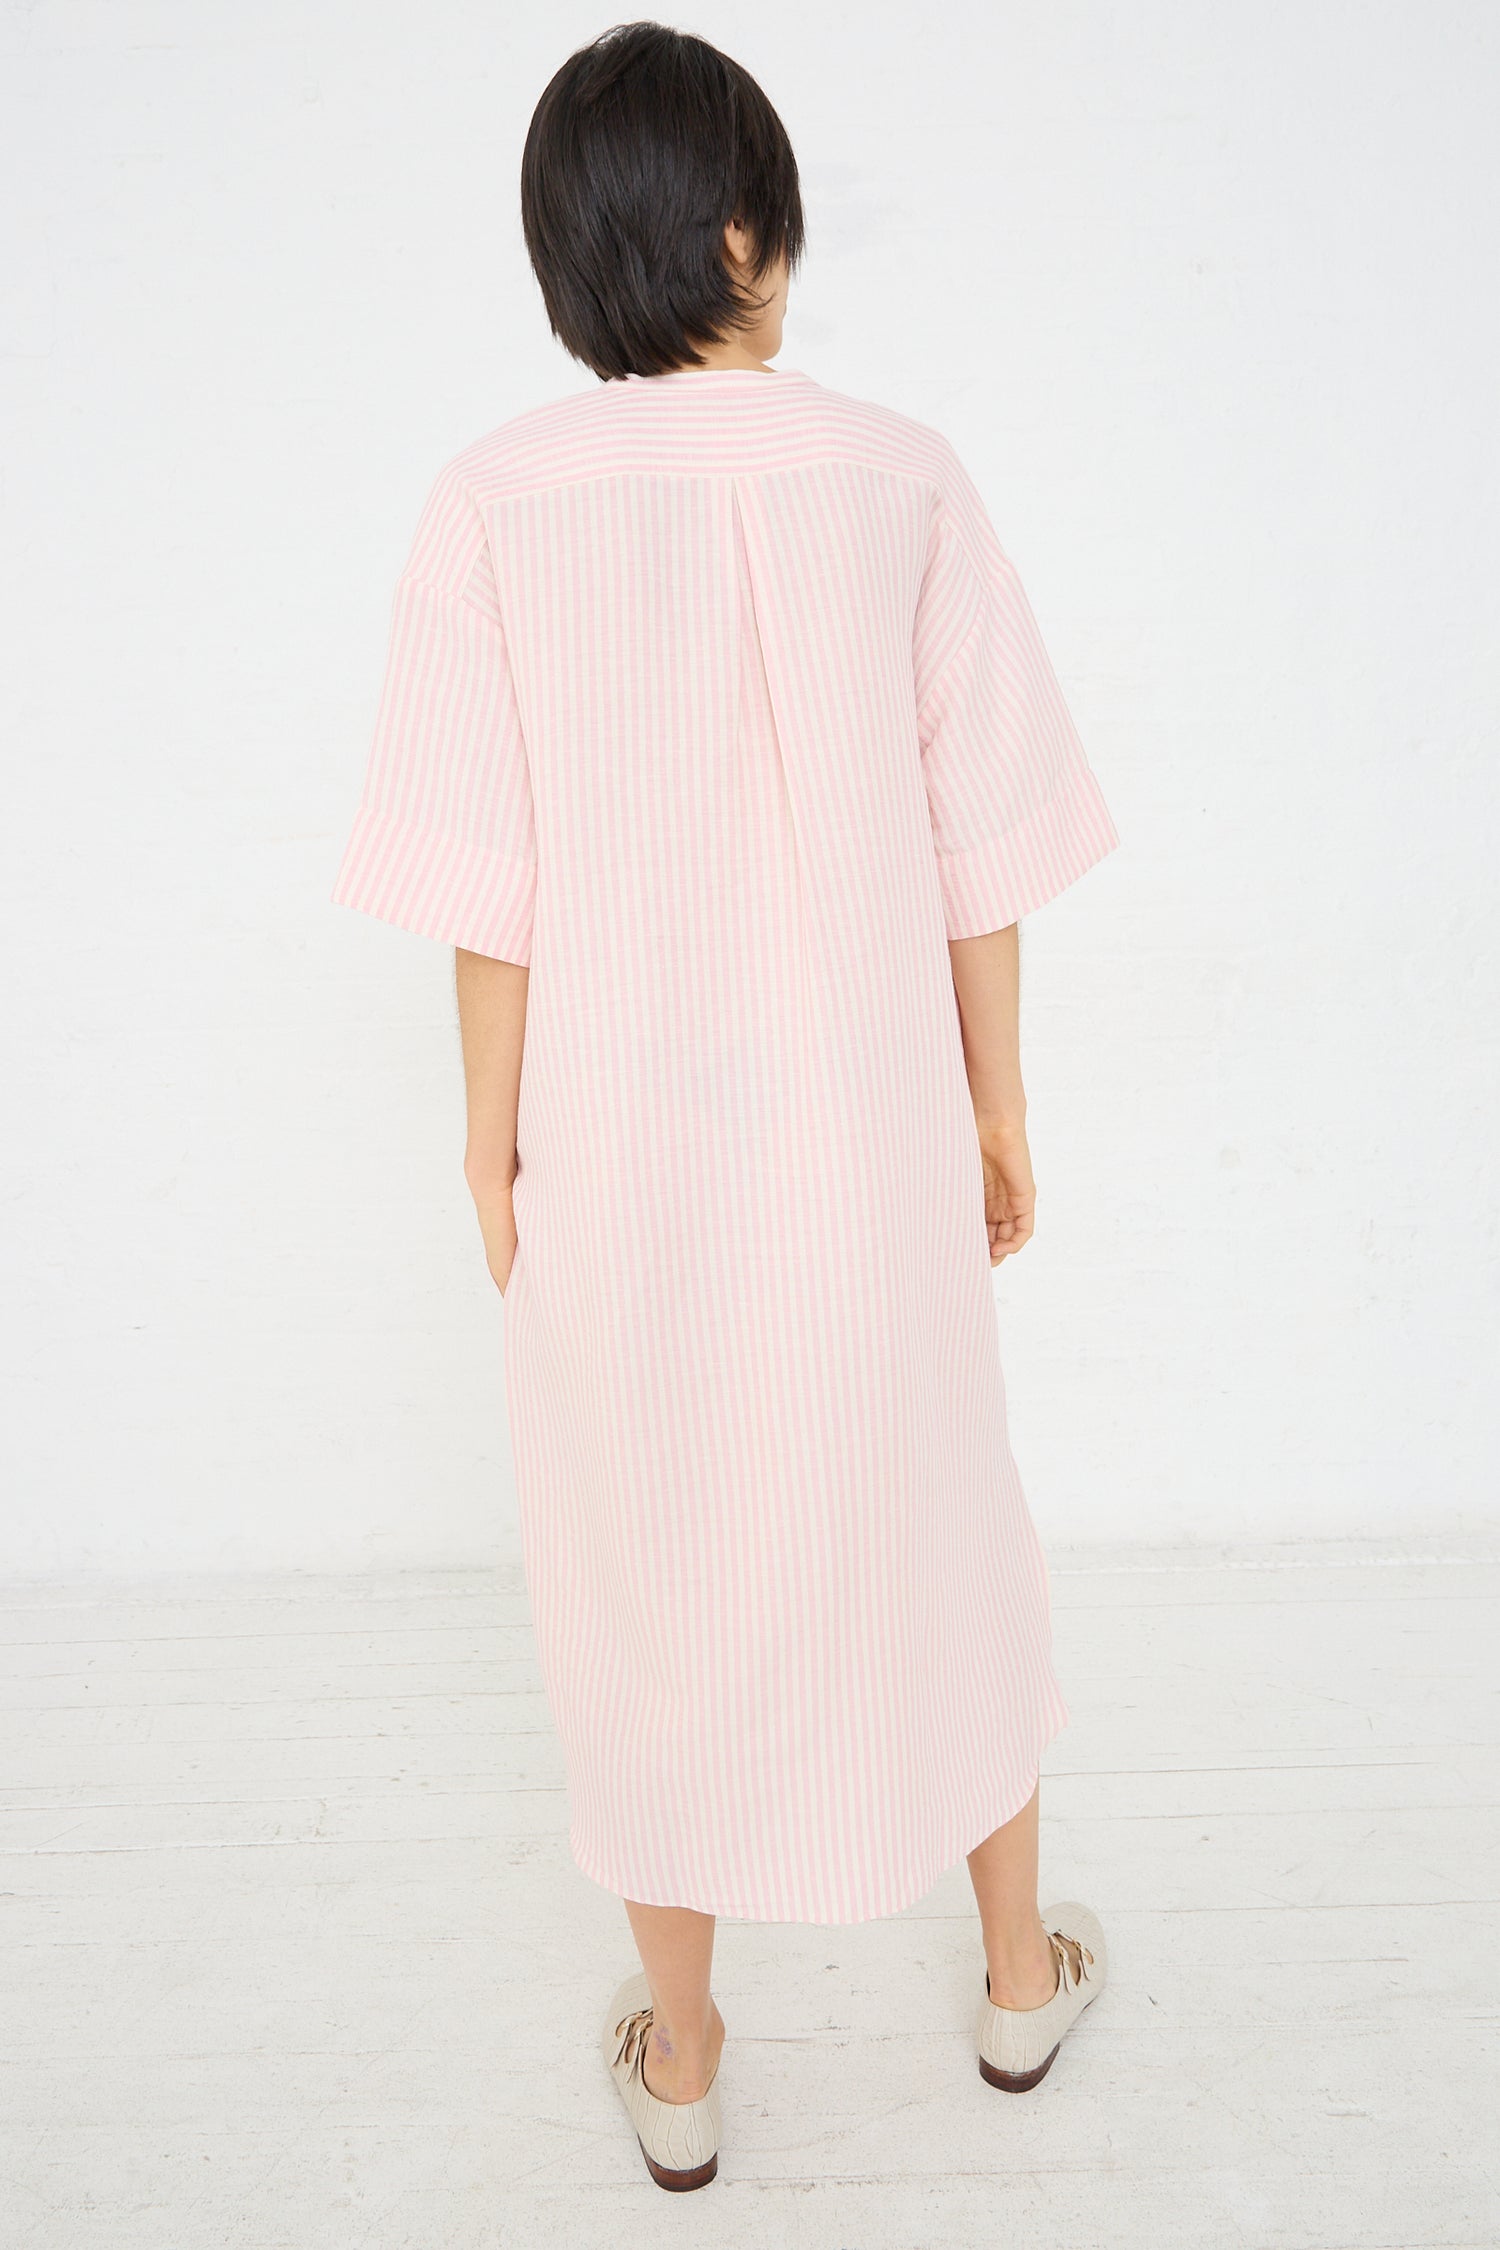 A person from behind wearing a Caron Callahan Linen Stripe Kalloni Dress in Pink with mid-length sleeves, standing in front of a white background.